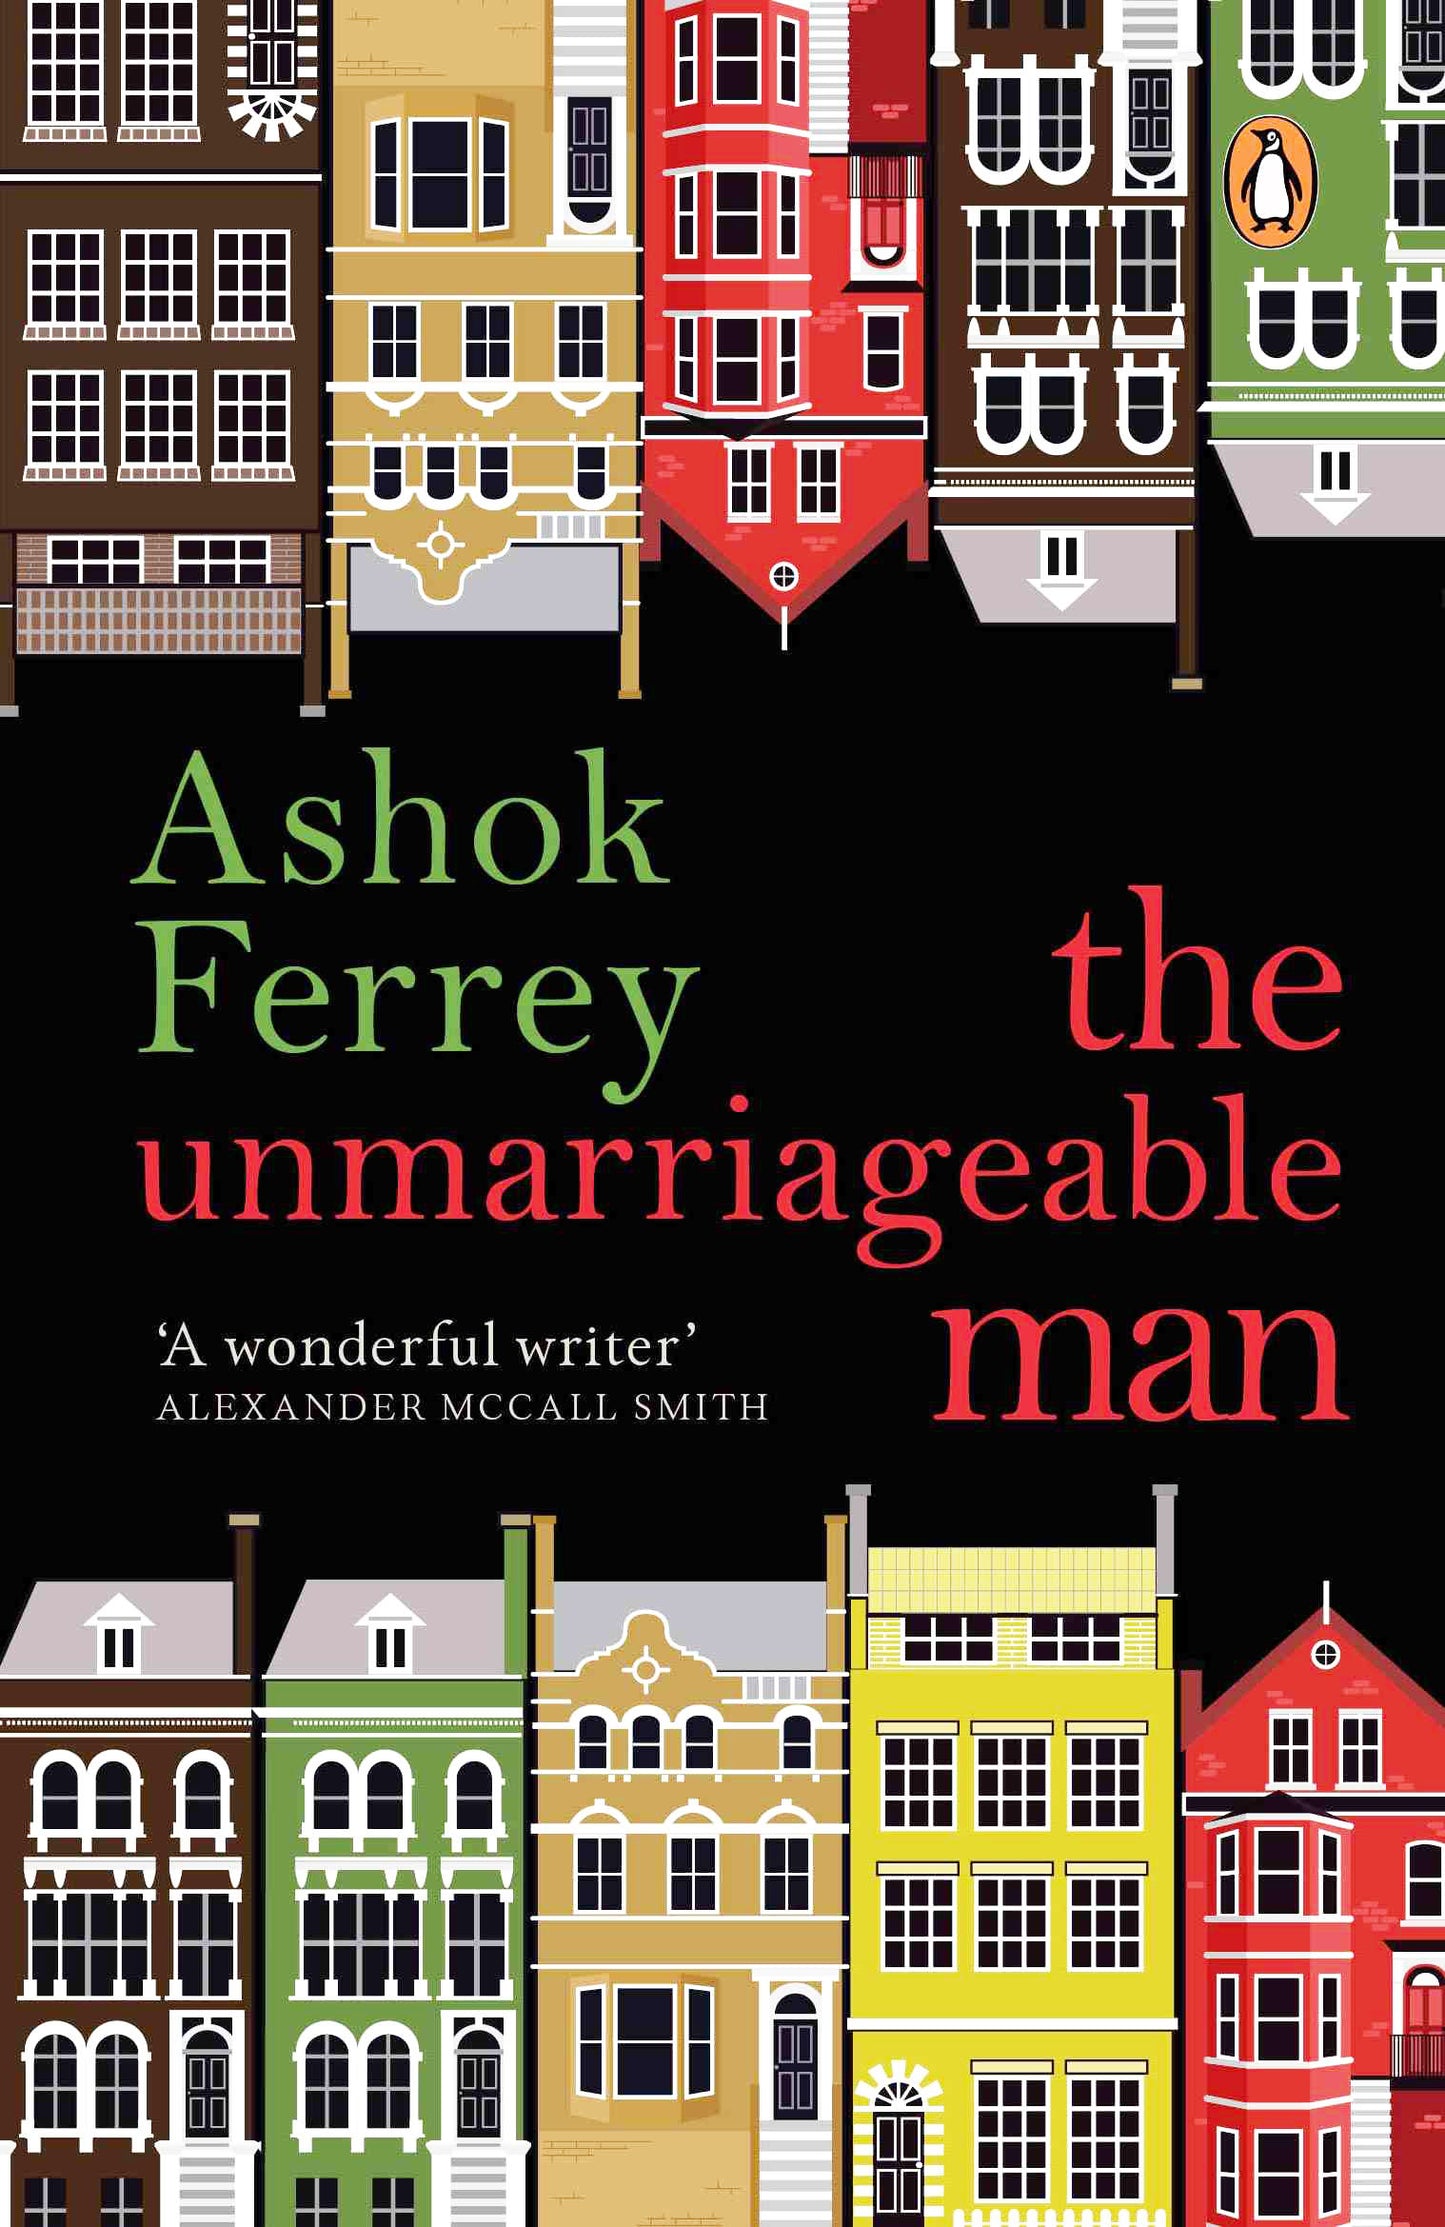 The Unmarriageable Man by Ashok Ferrey. "Winner of the Gratiaen Prize 2021"